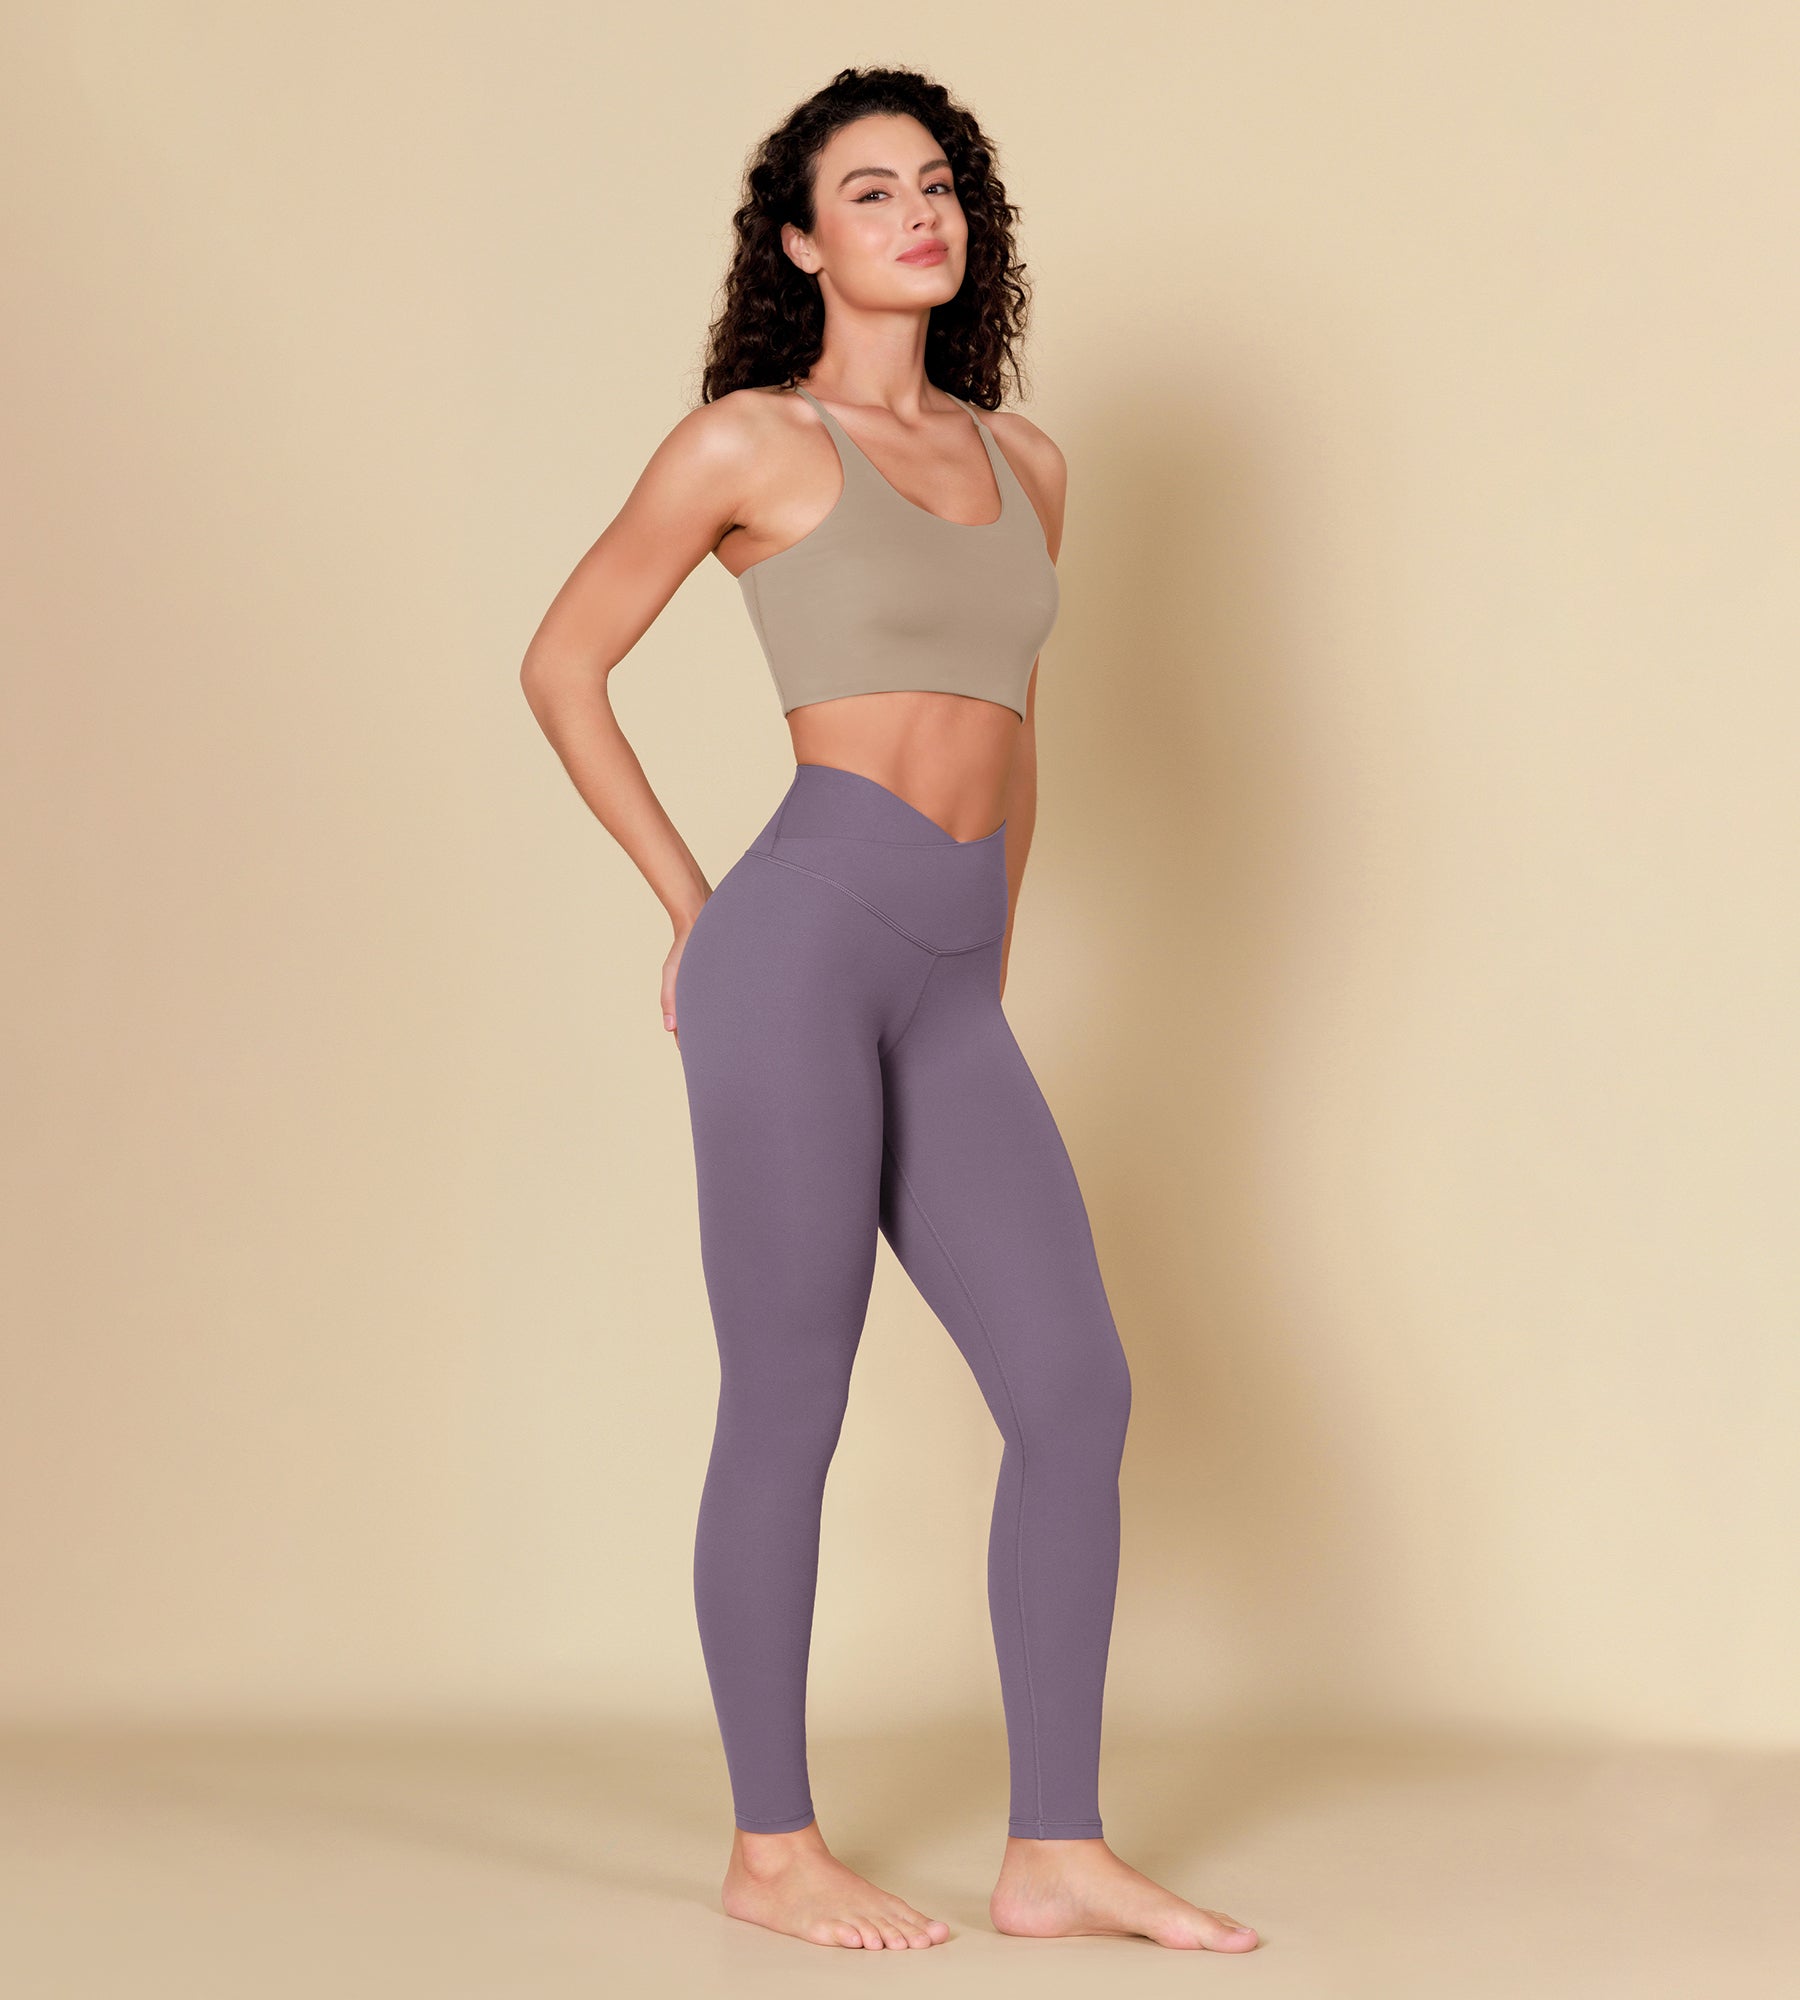 ODCLOUD Crossover 28" Leggings with Back Pocket - Classic Colors Ash Violet - ododos